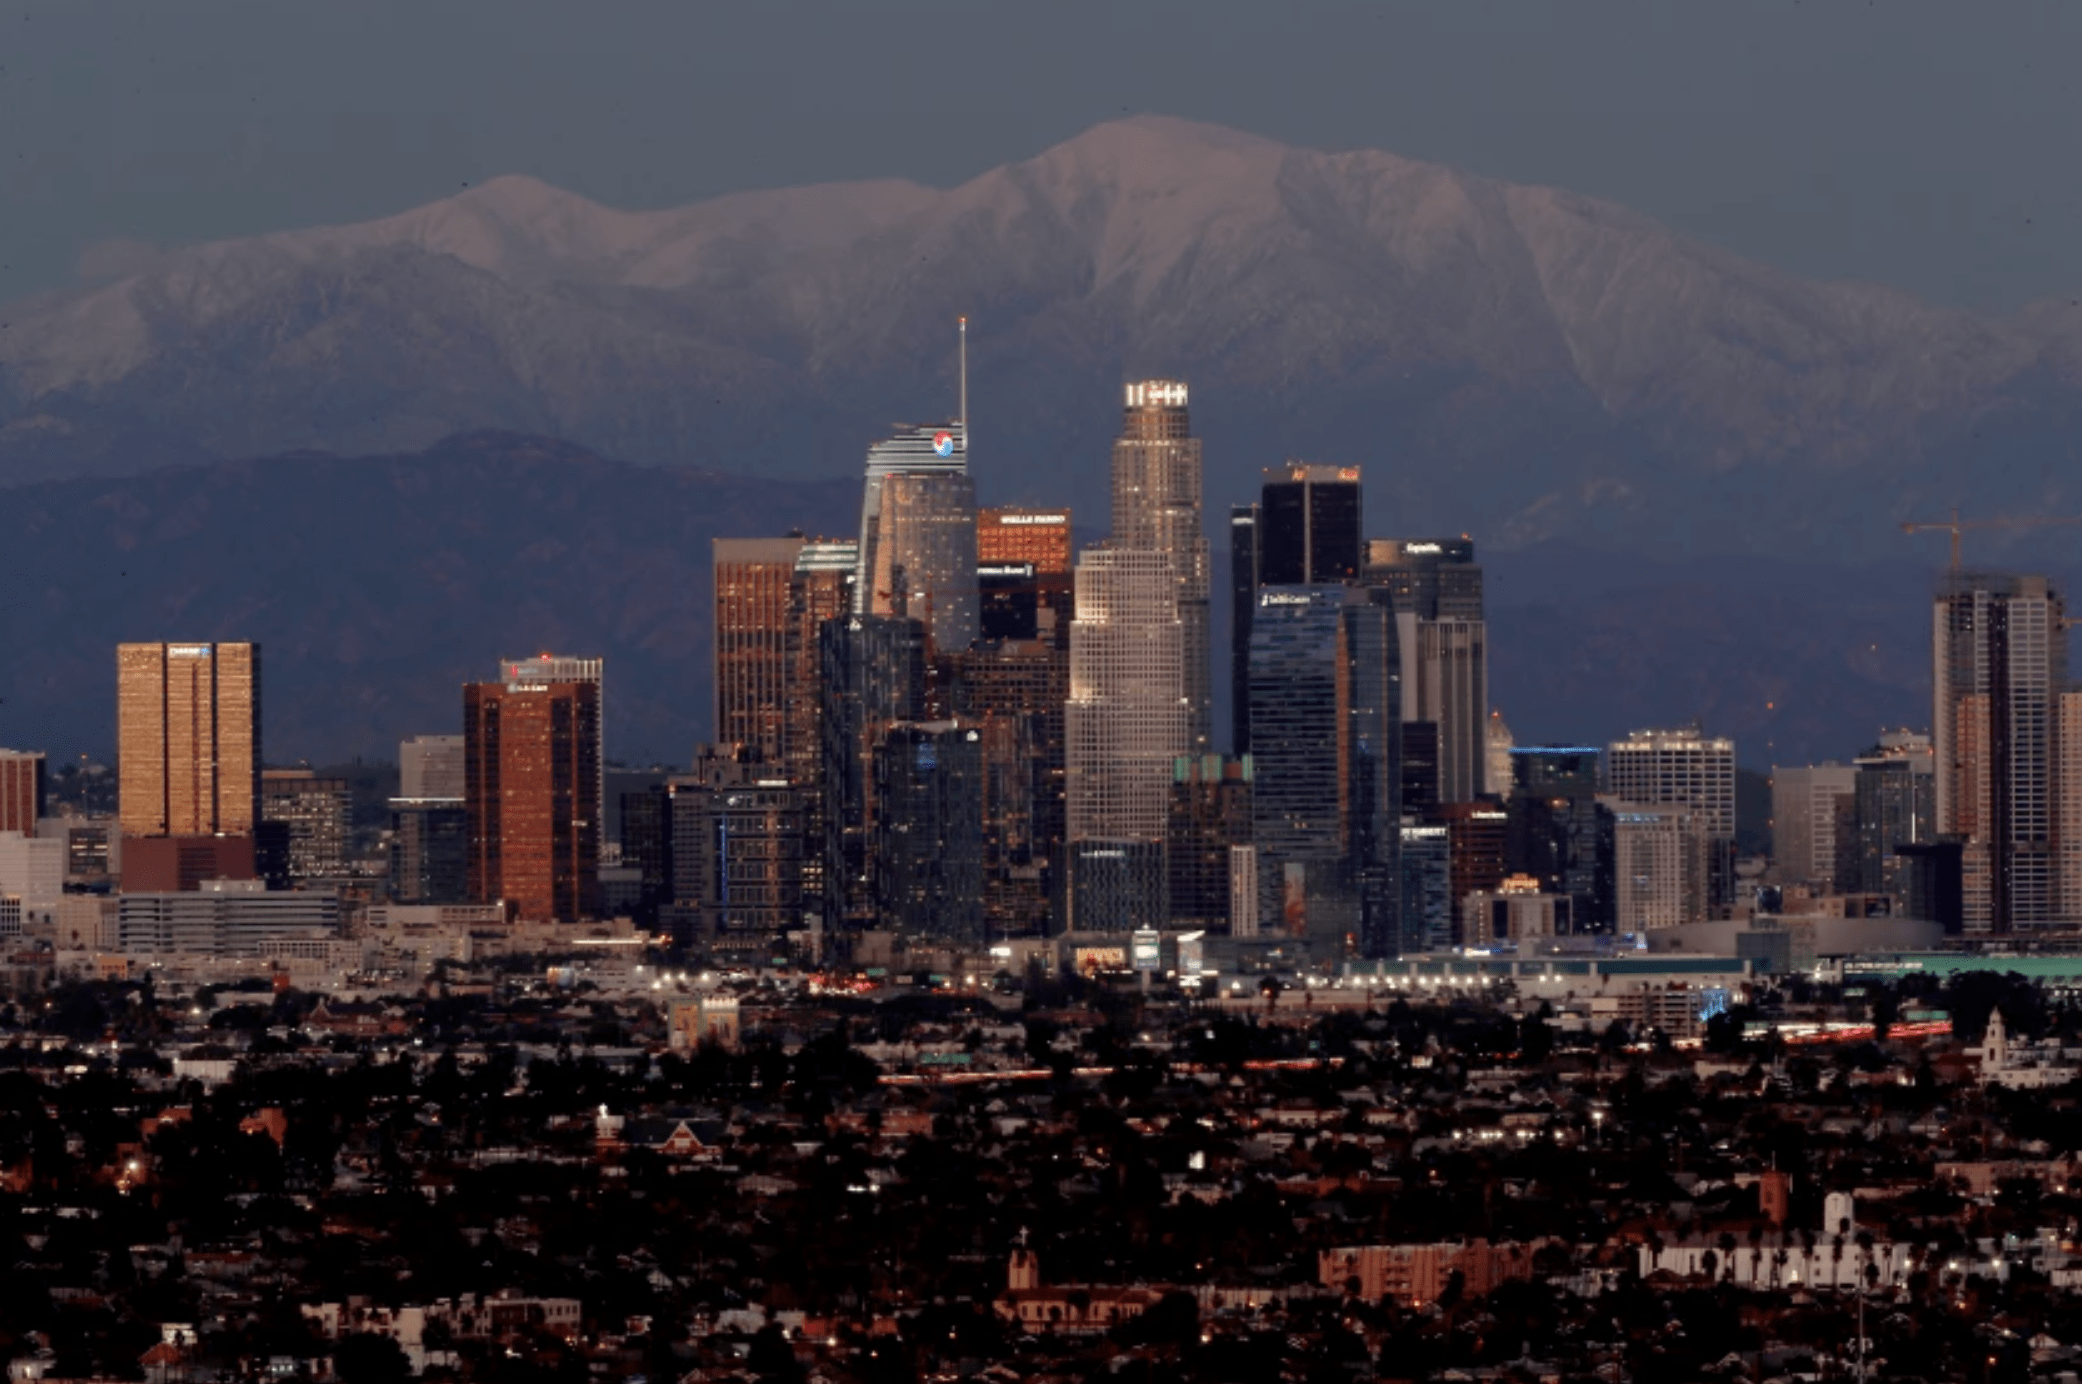 Snow covers Mt. Baldy behind the Los Angeles skyline on Wednesday. The recent cold weather is expected to give way to a warming trend. (Luis Sinco/Los Angeles Times)